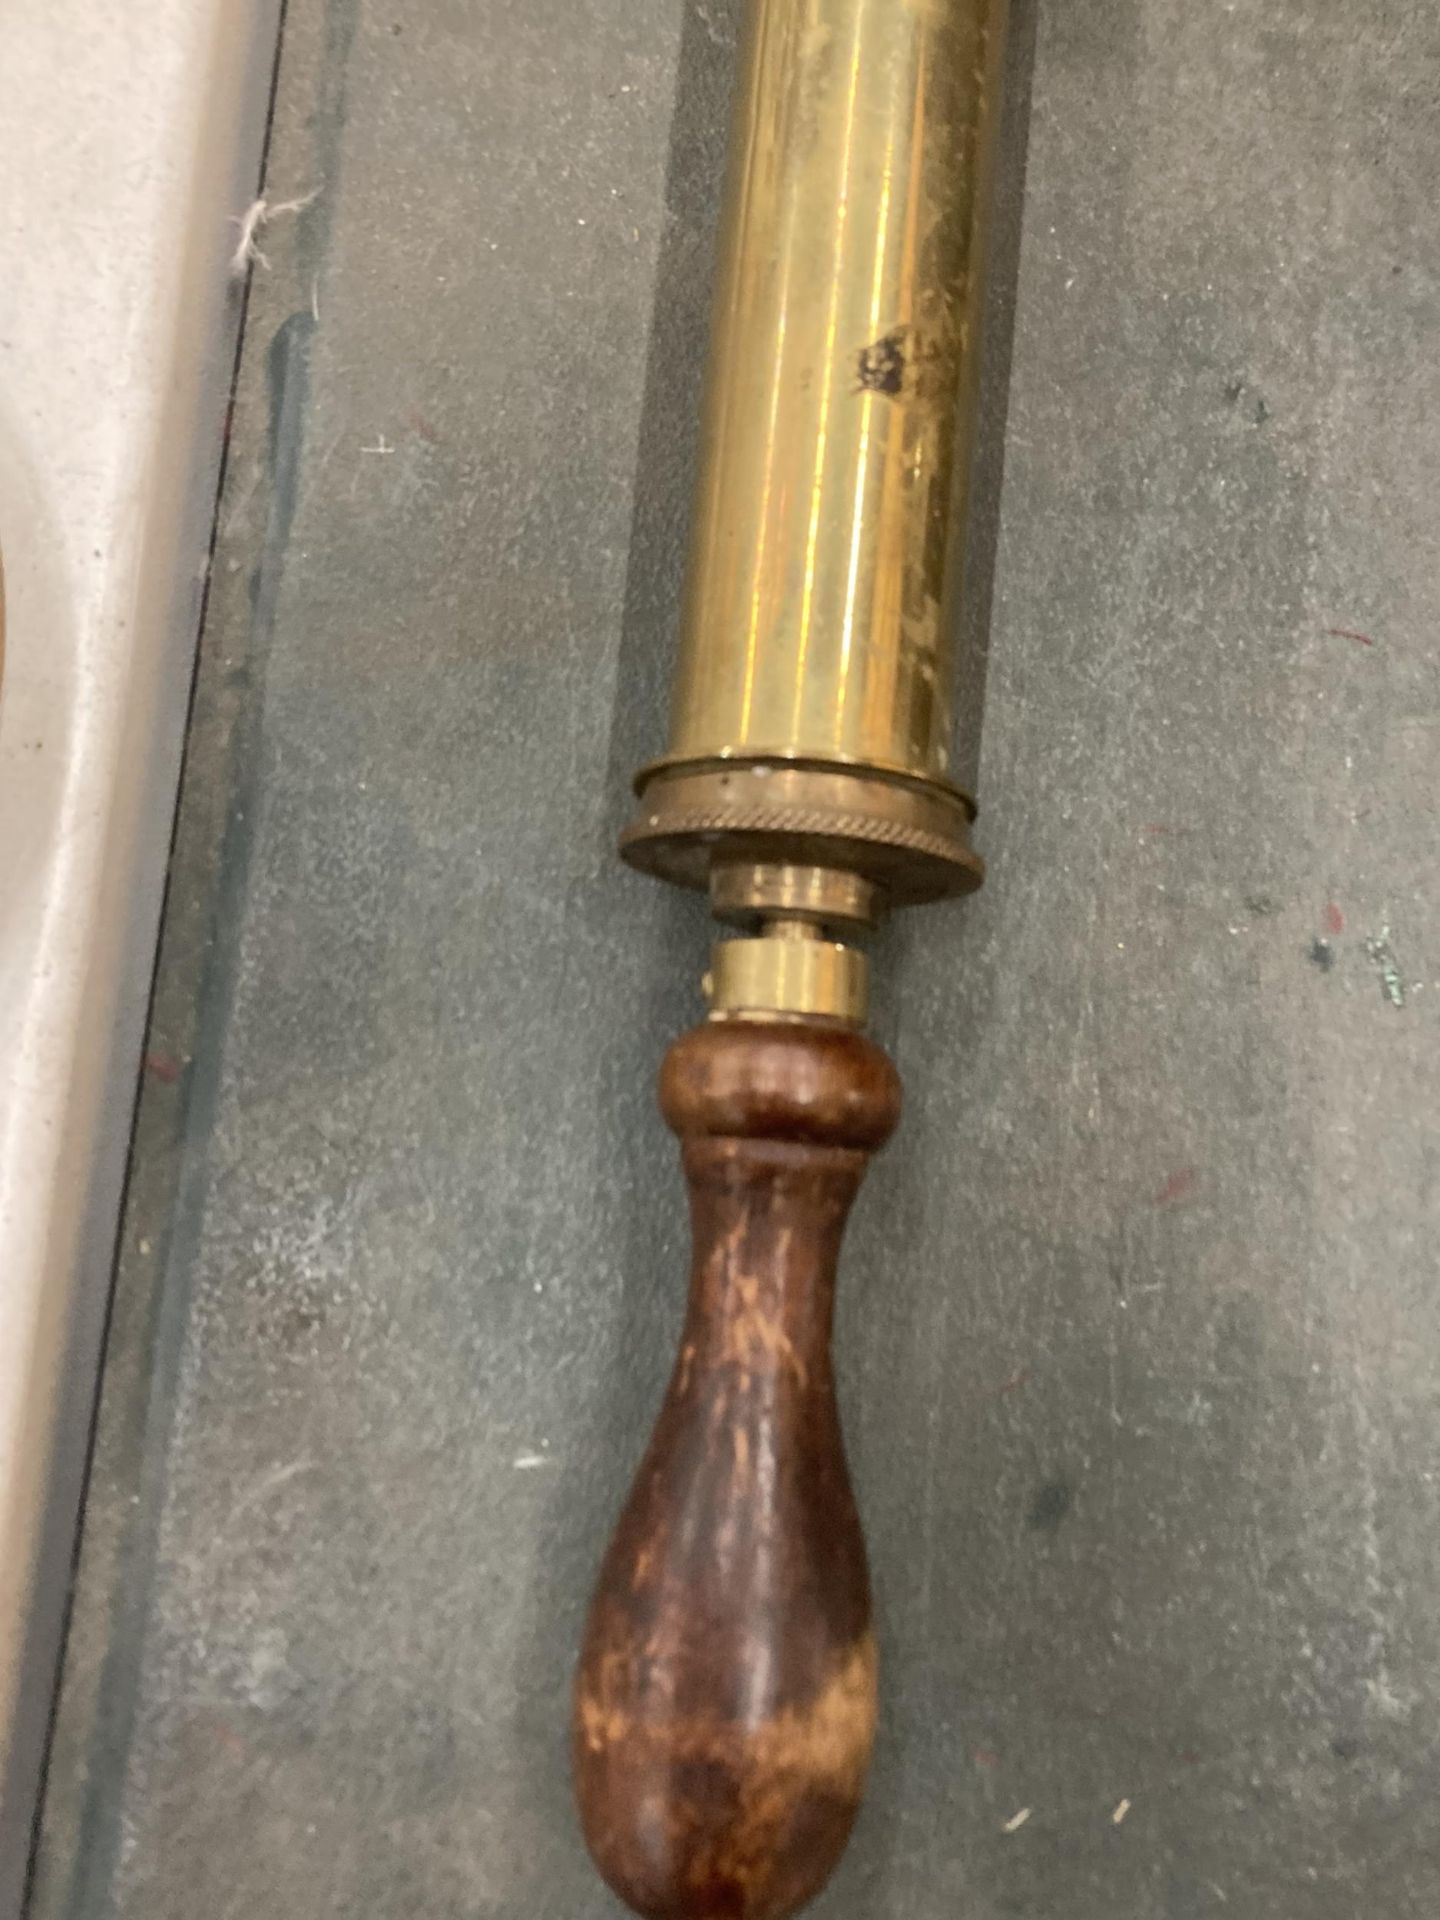 A VINTAGE BRASS GARDEN SPRAYER WITH WOODEN HANDLE - Image 2 of 3